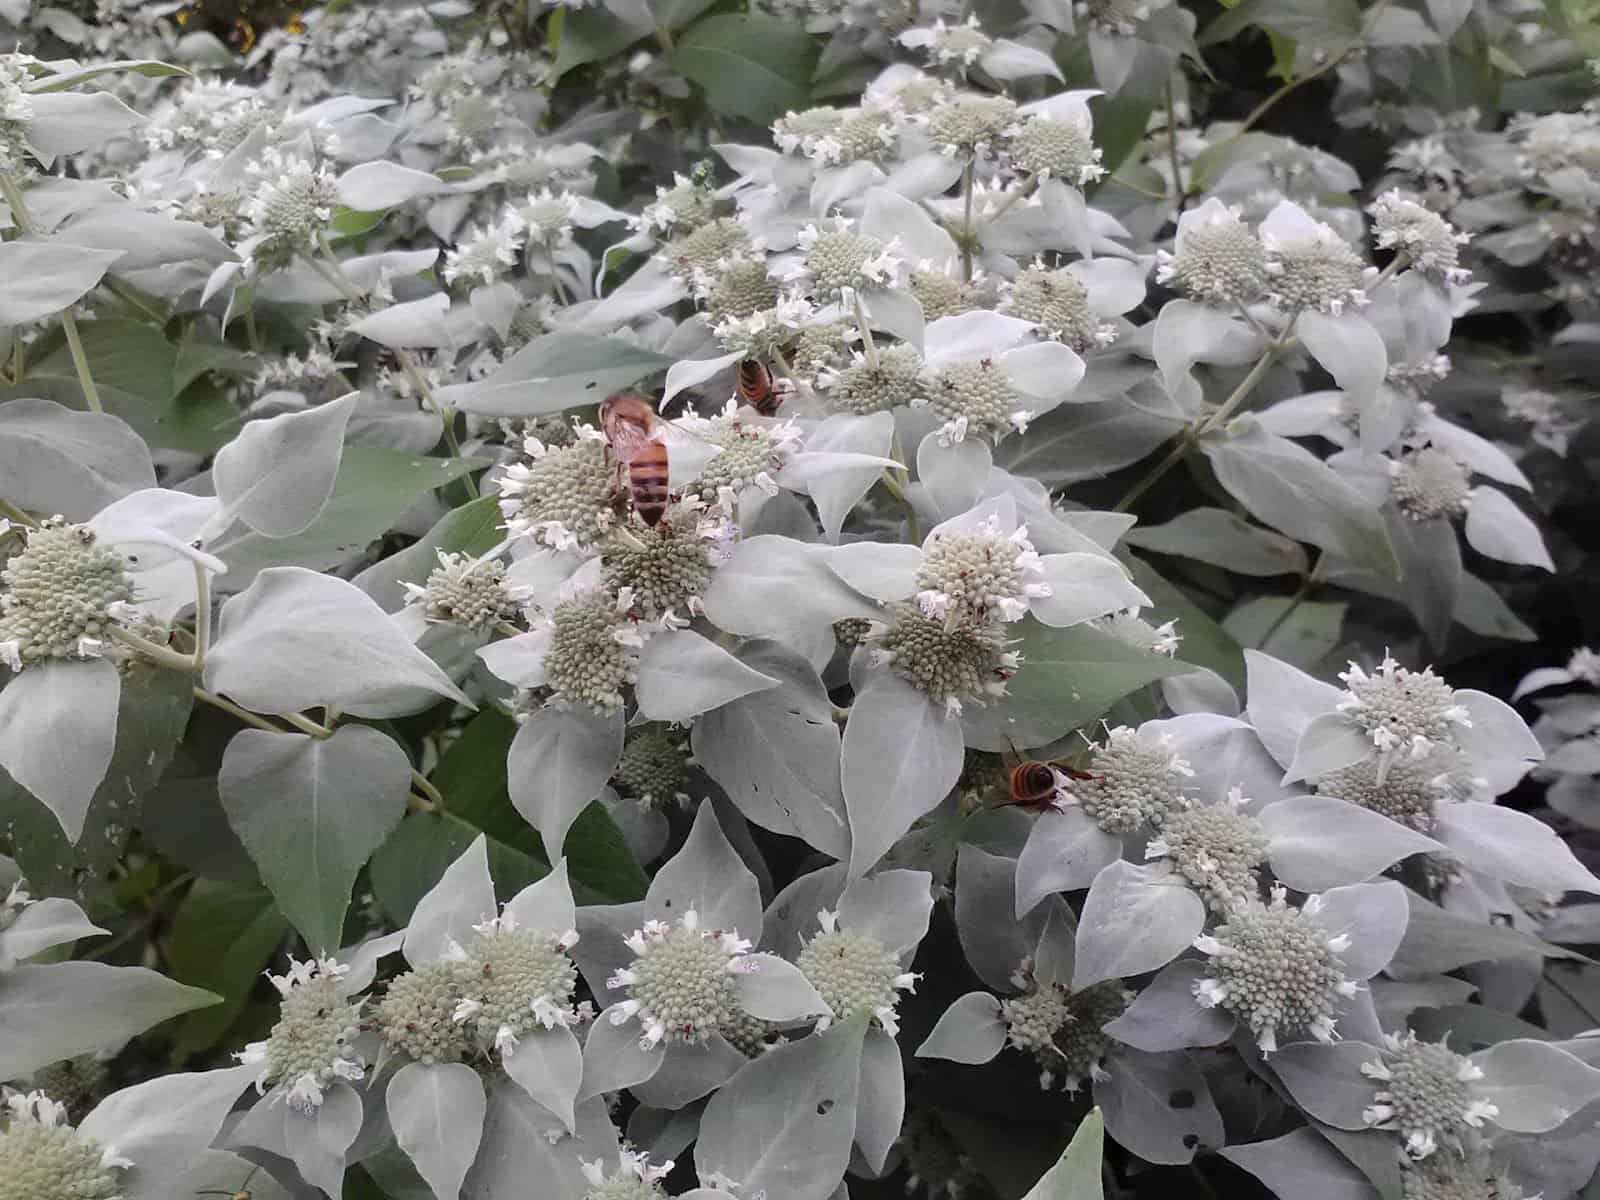 A group of bees on a mountain mint plant.